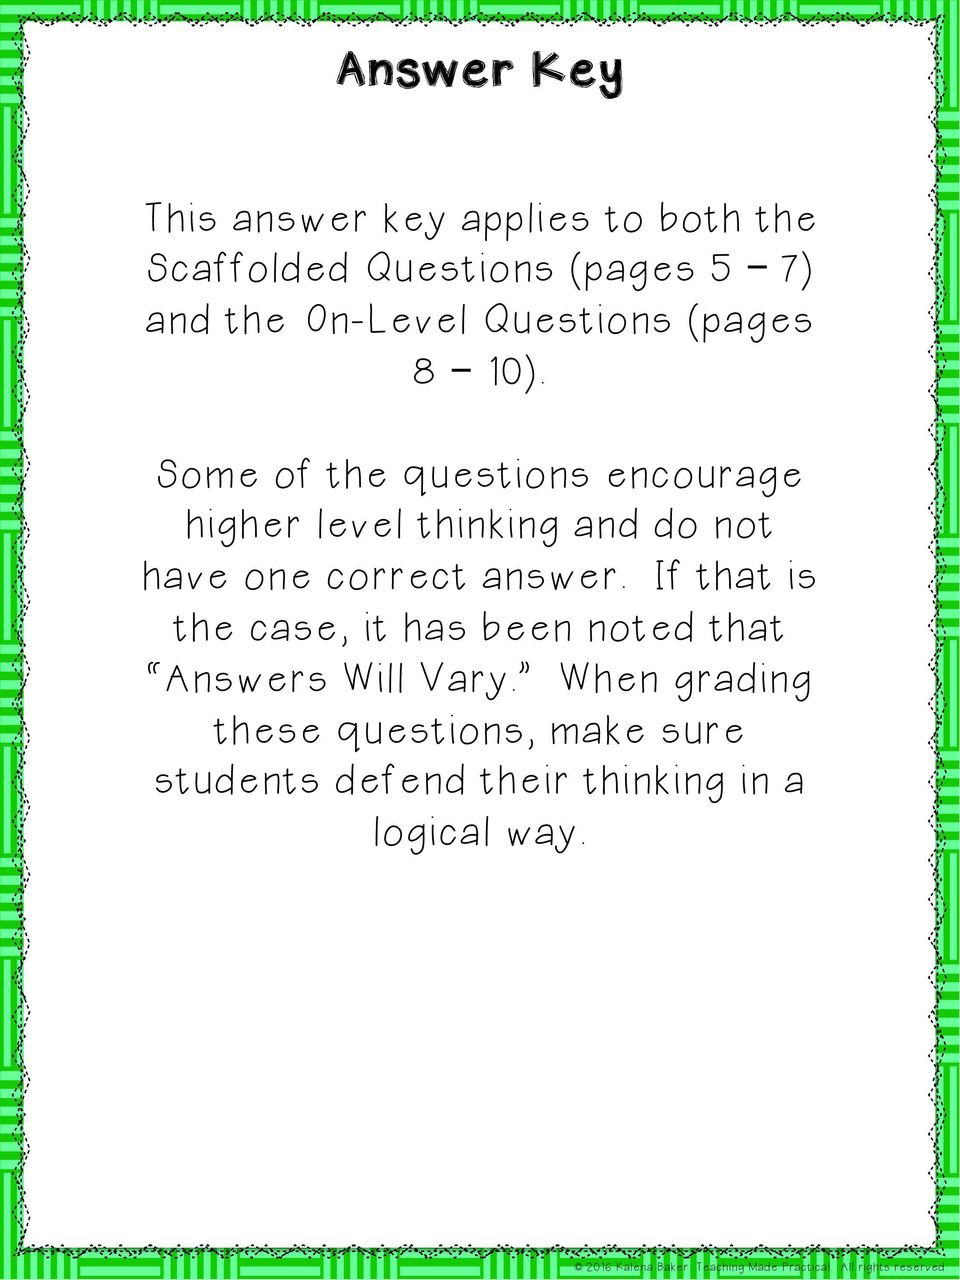 Some of the questions encourage higher level thinking and do not have one correct answer.